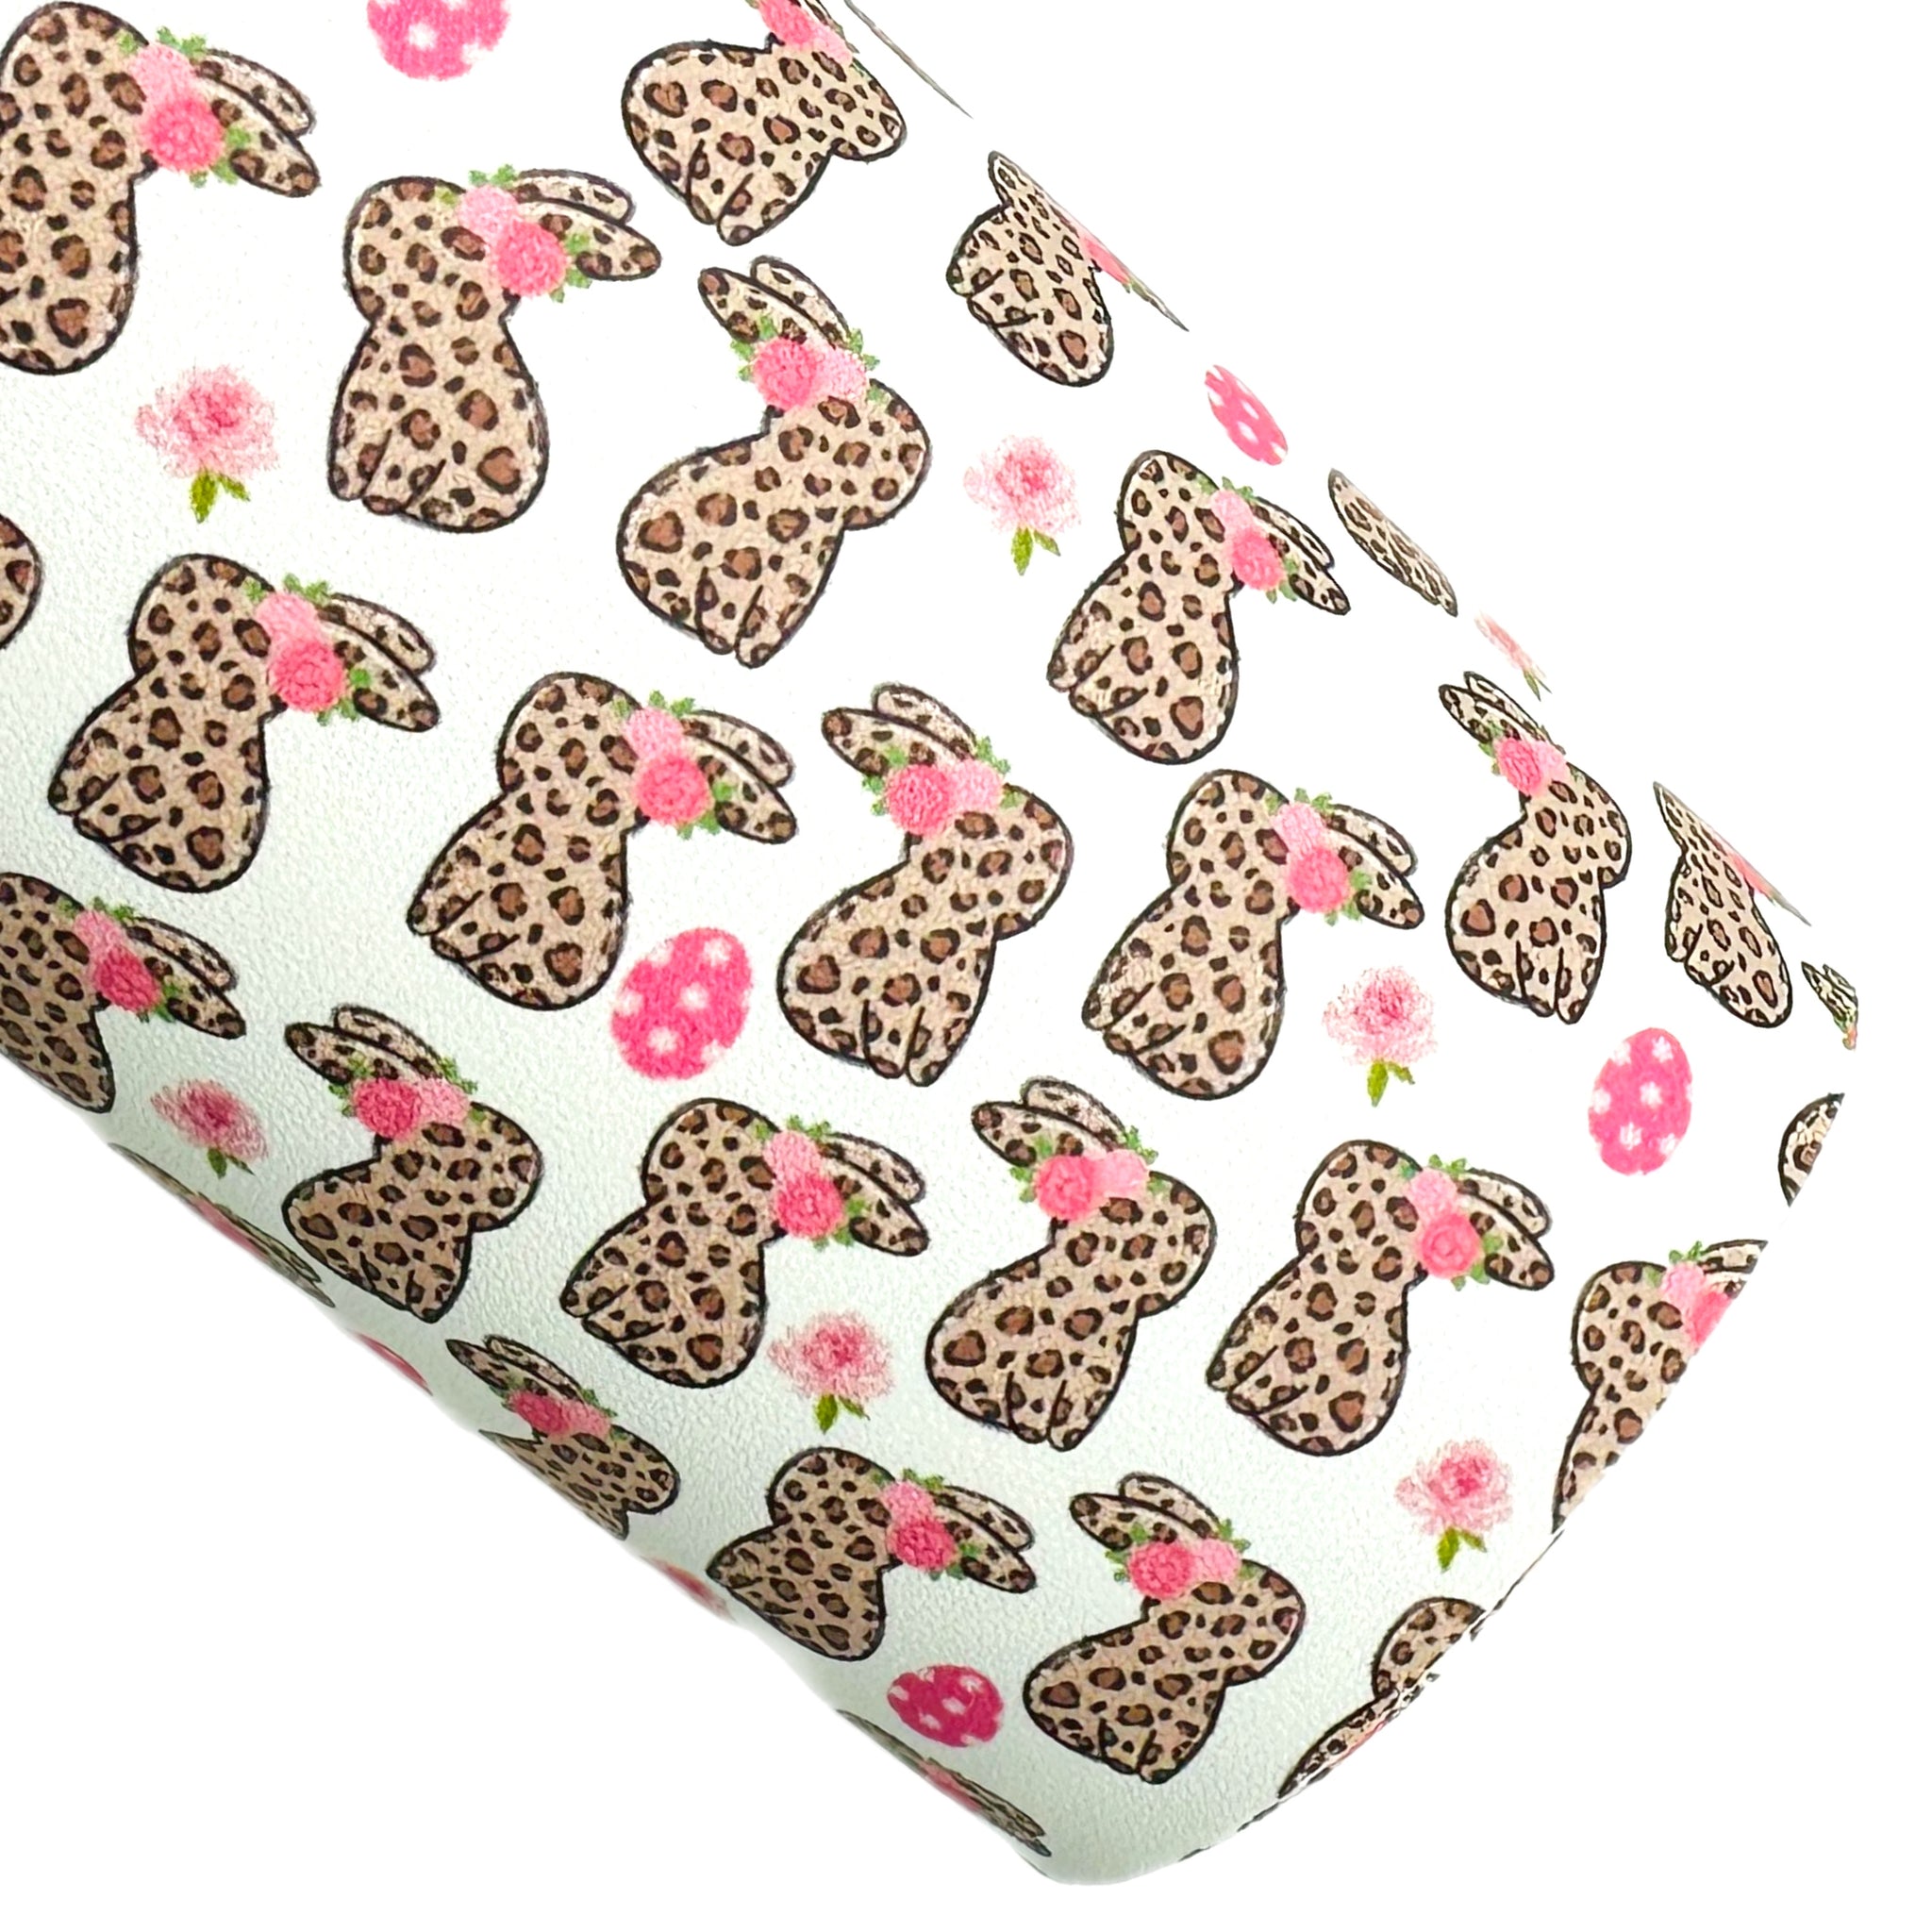 Leopard Bunnies Custom Print on Smooth Faux Leather